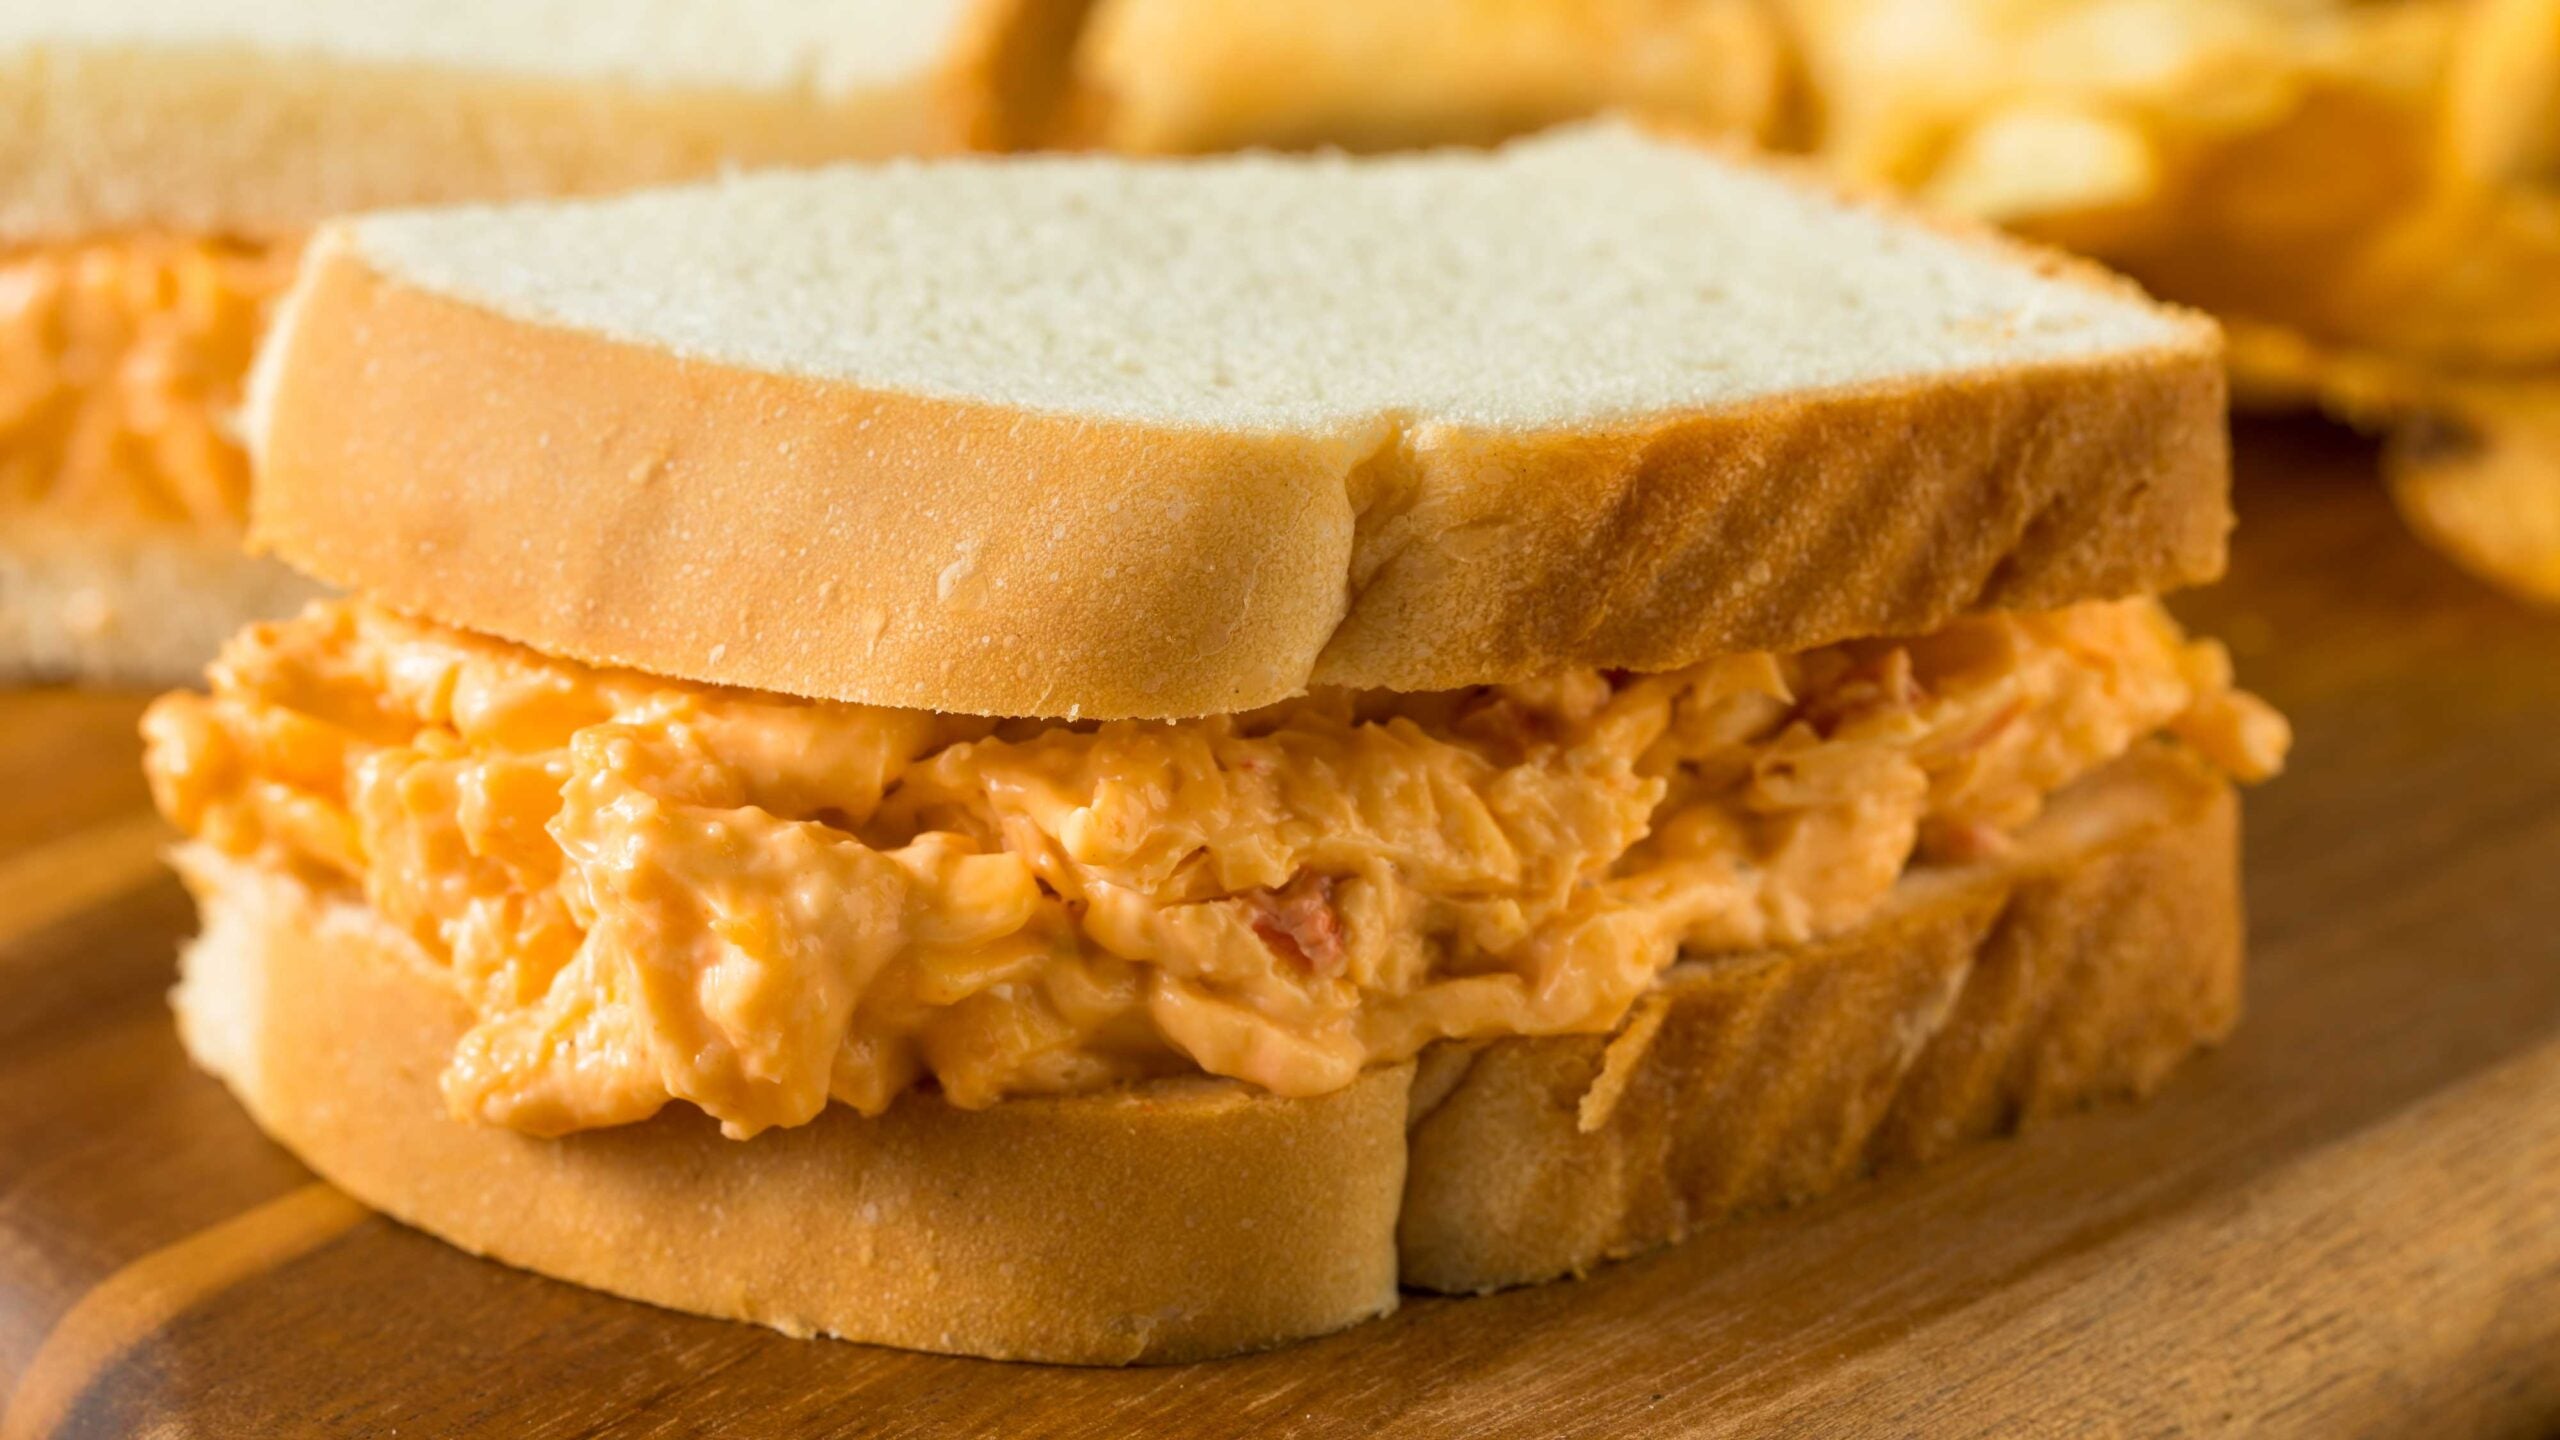 Michelin star chef *This* is how you make a pimento cheese sandwich